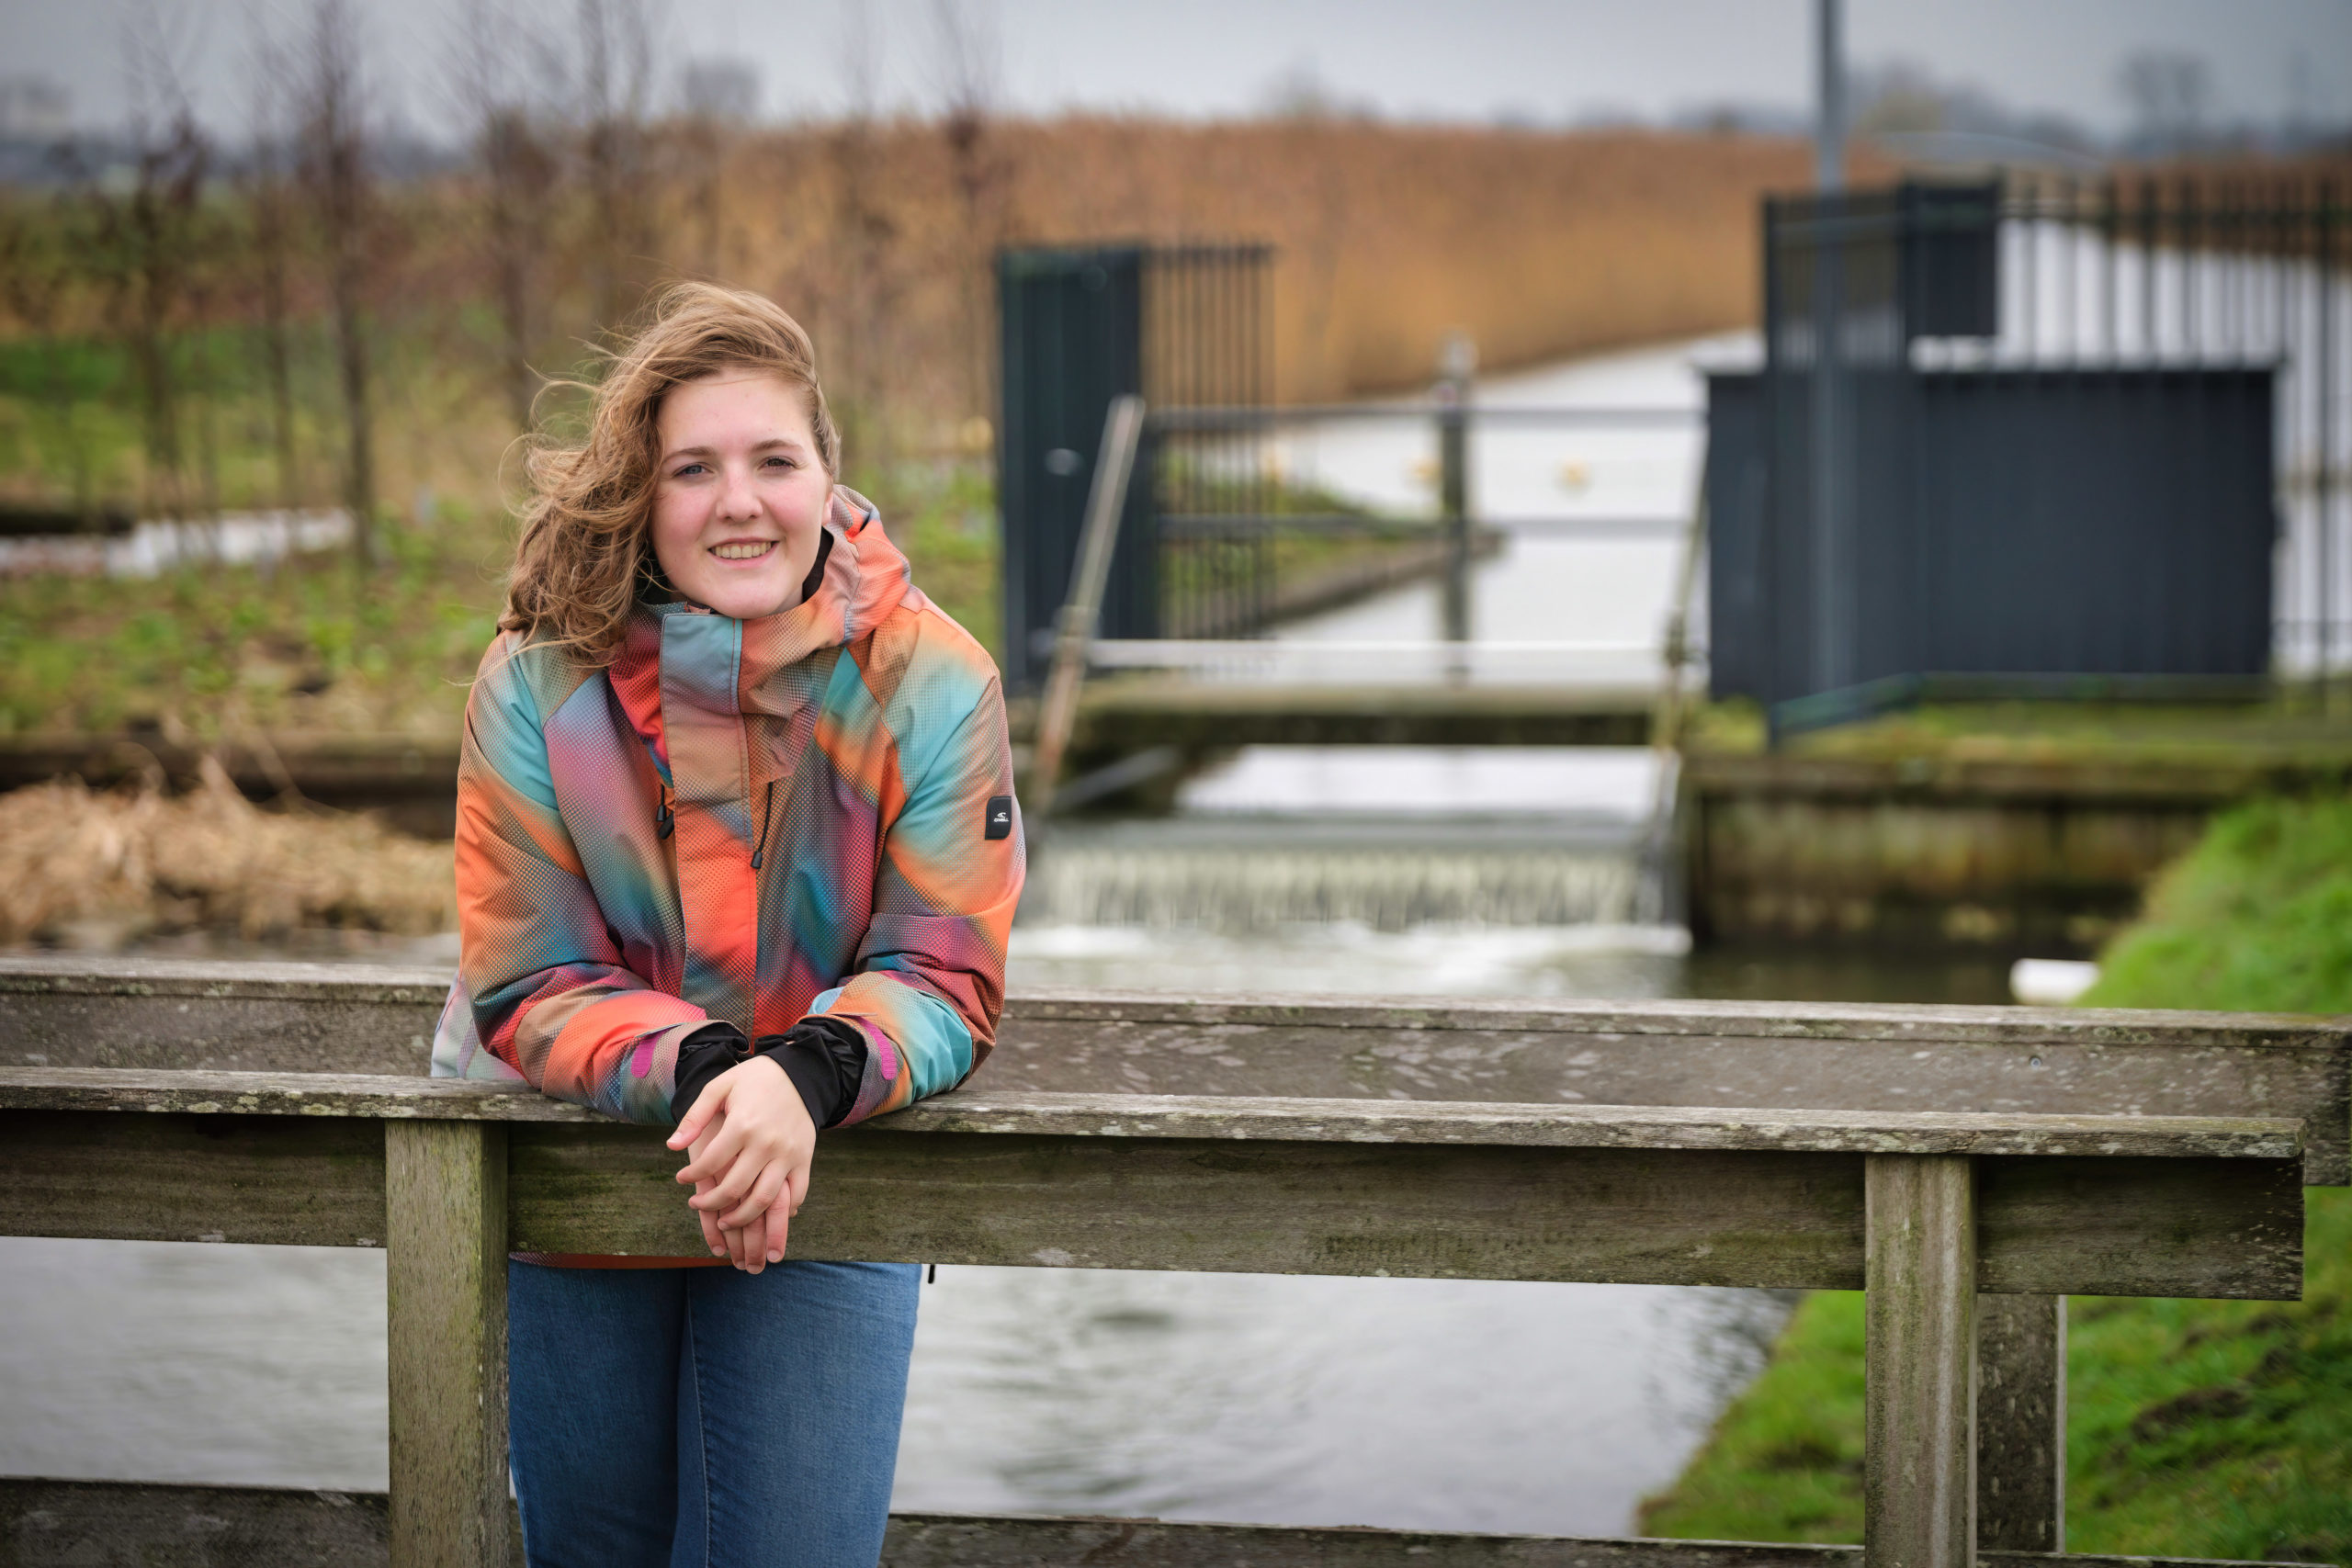 WUR student narrowly misses Water Authority position